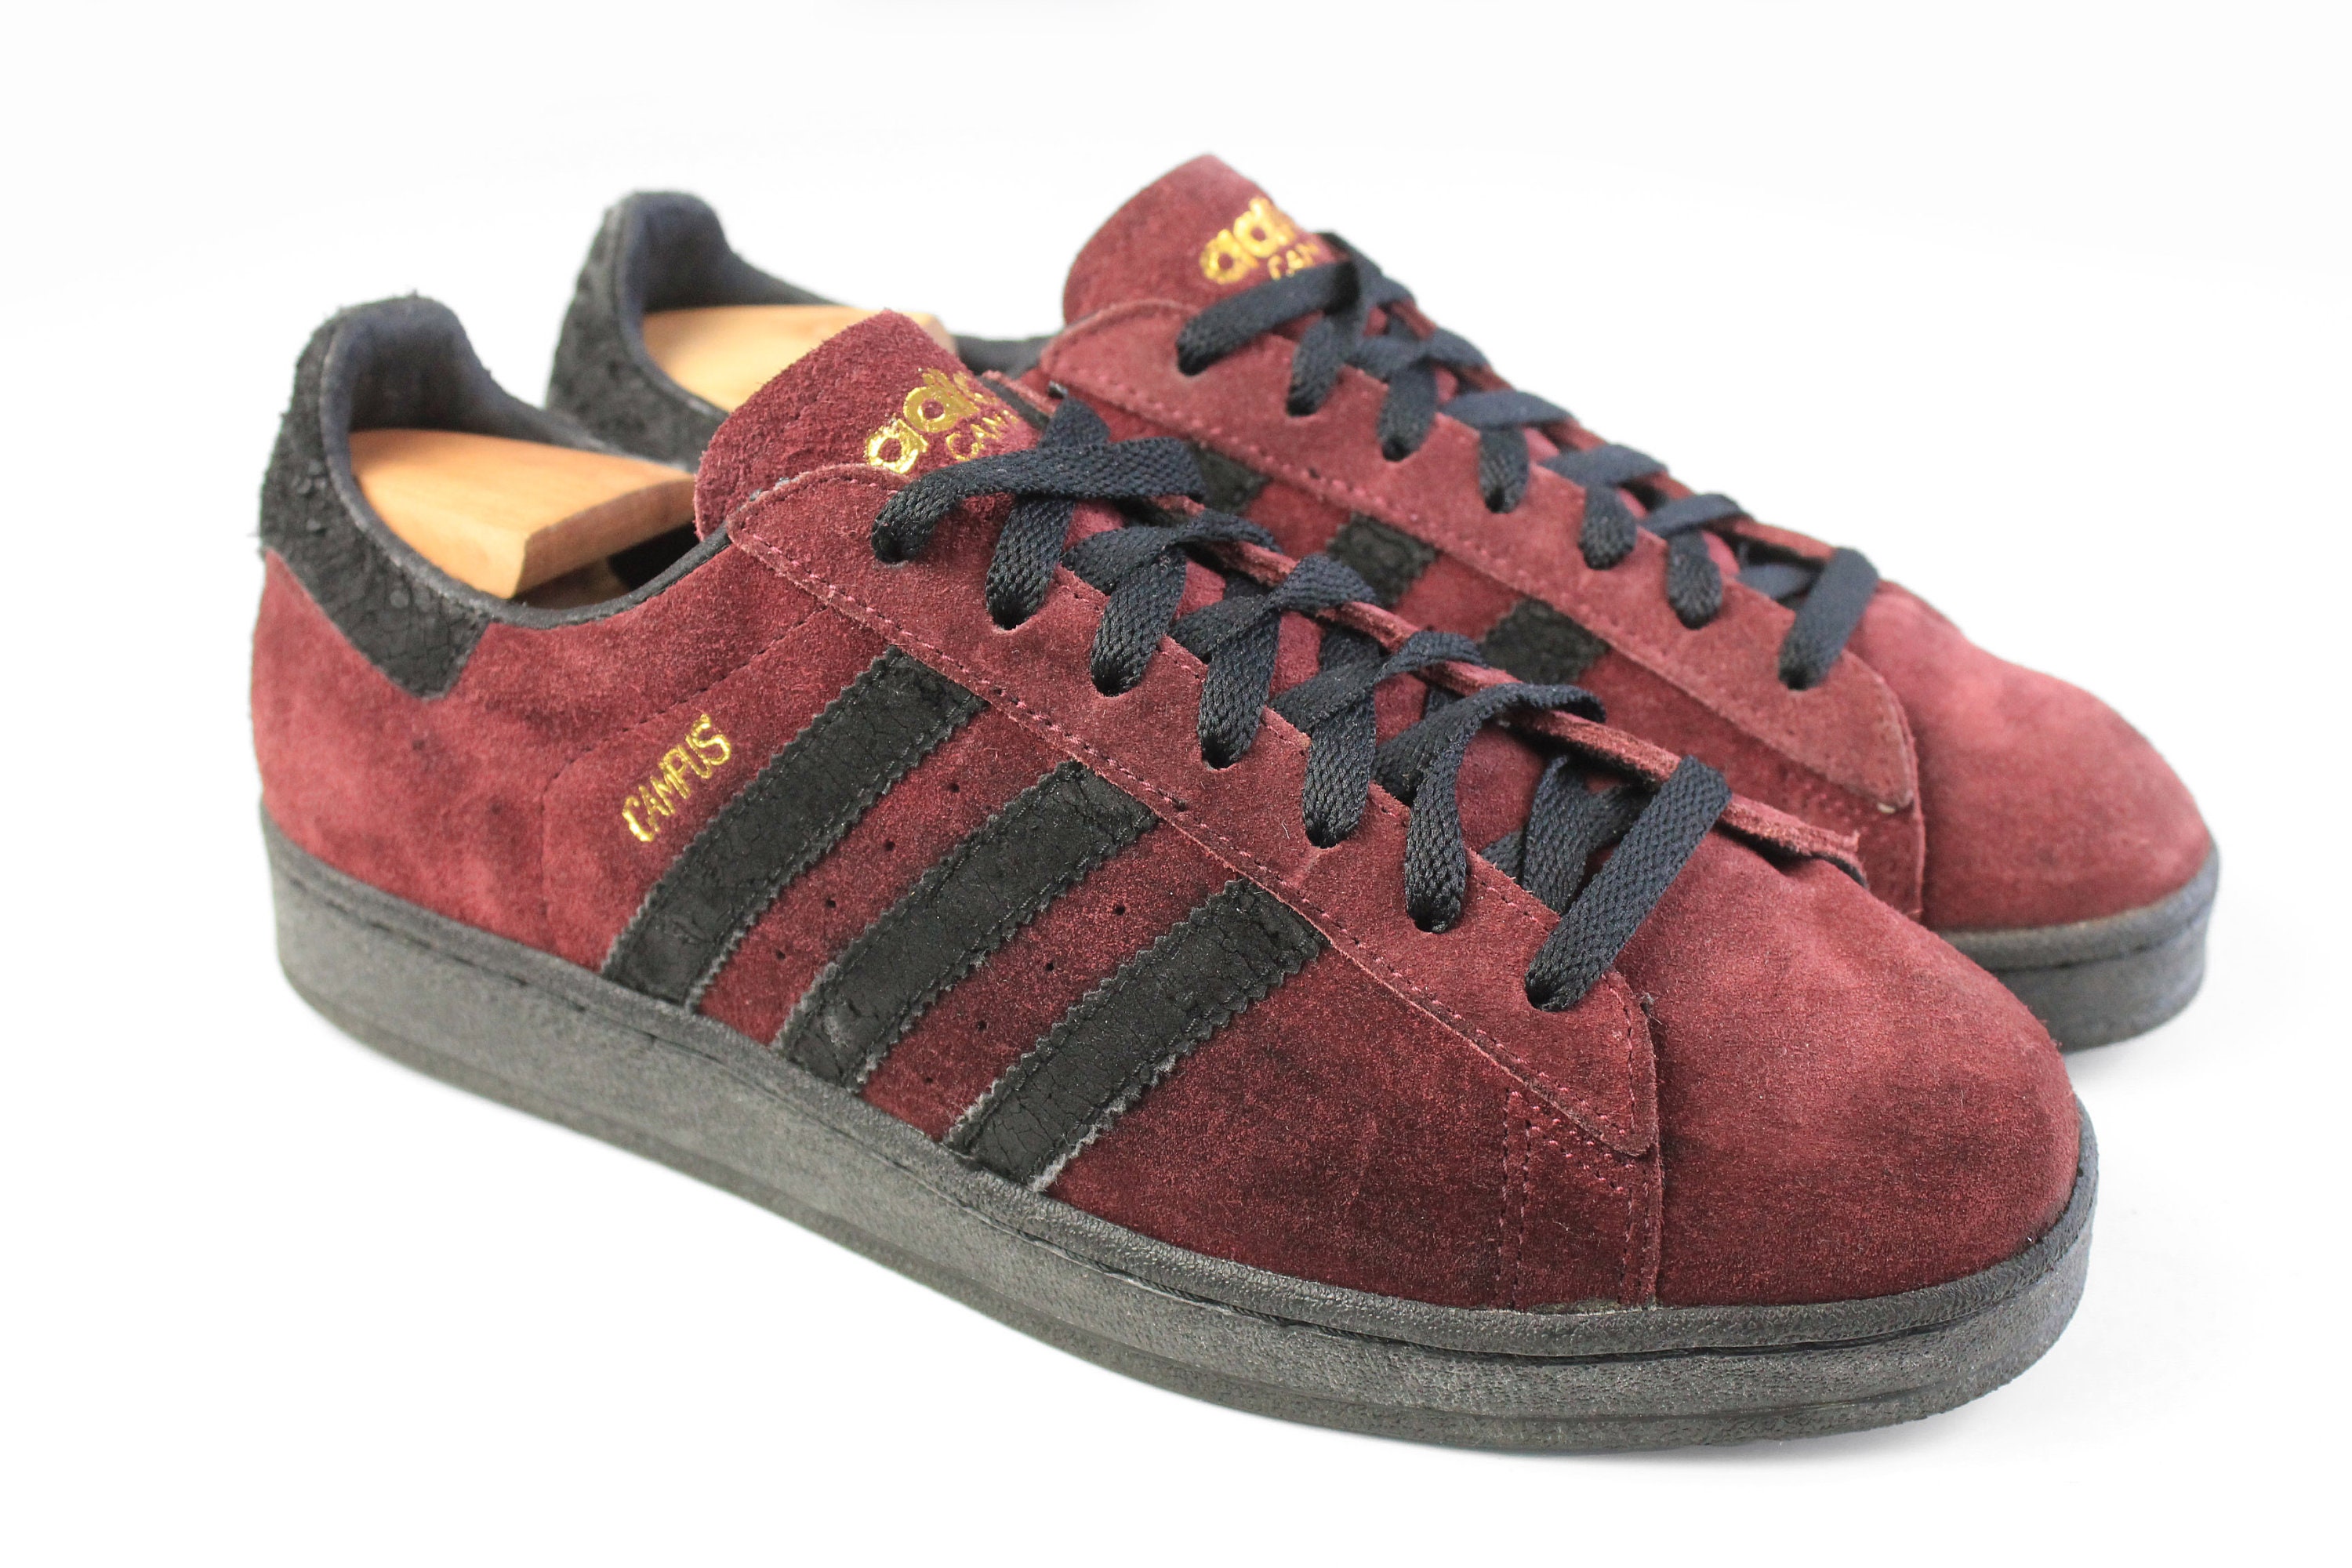 ADIDAS Campus Sneakers Red Suede Size US Men's - Denmark